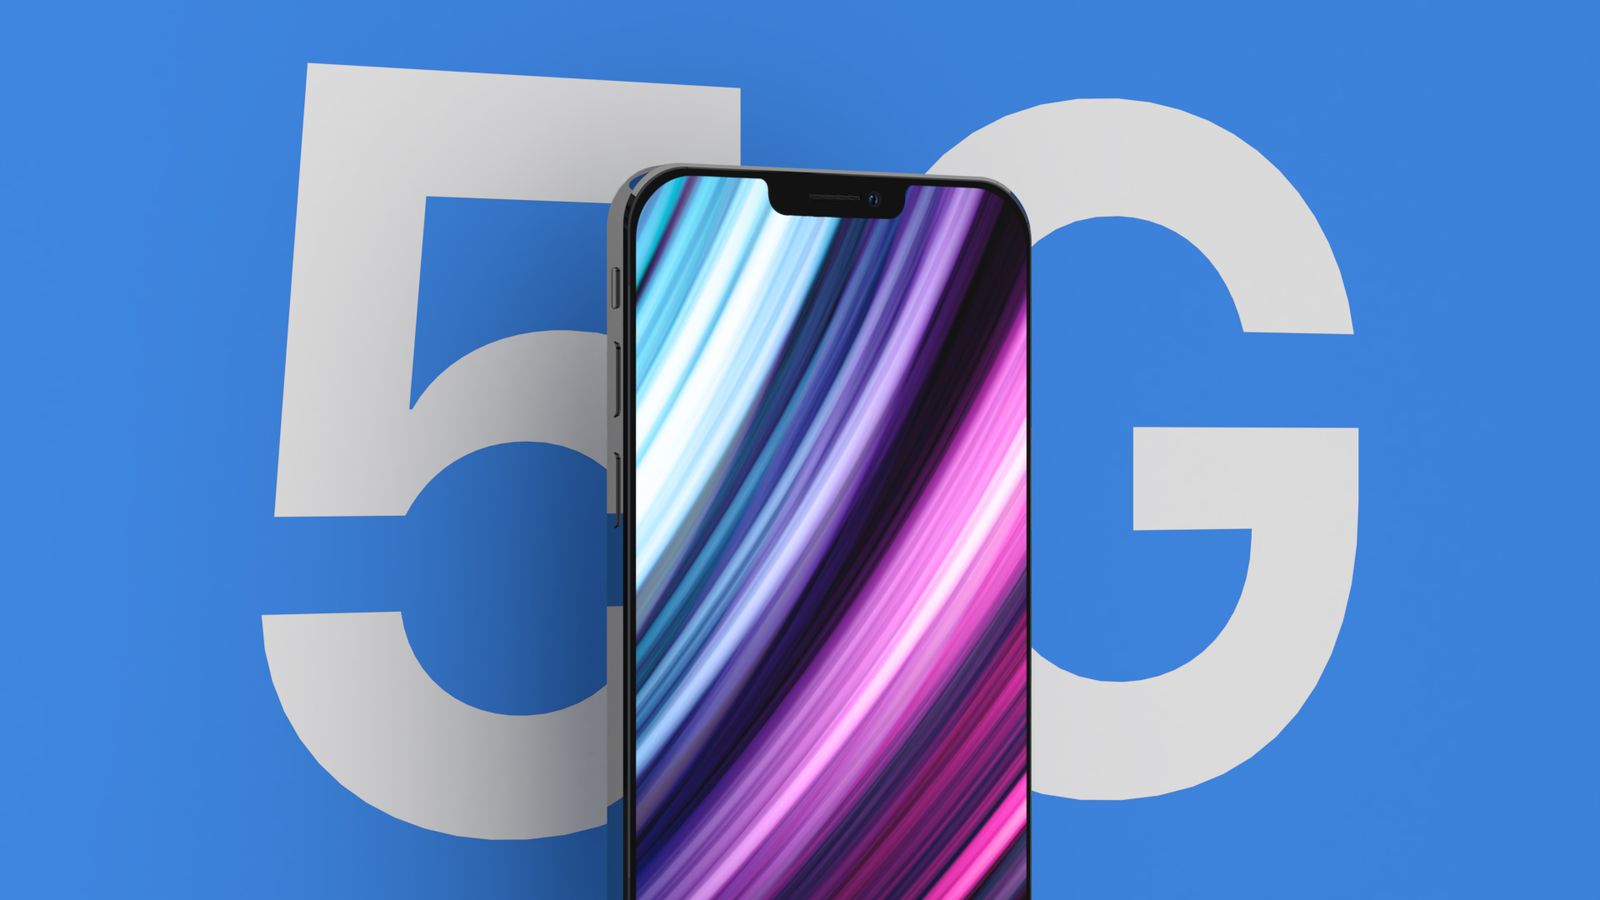 iPhone 12 May See 5G Connectivity Issues in the UK - MacRumors